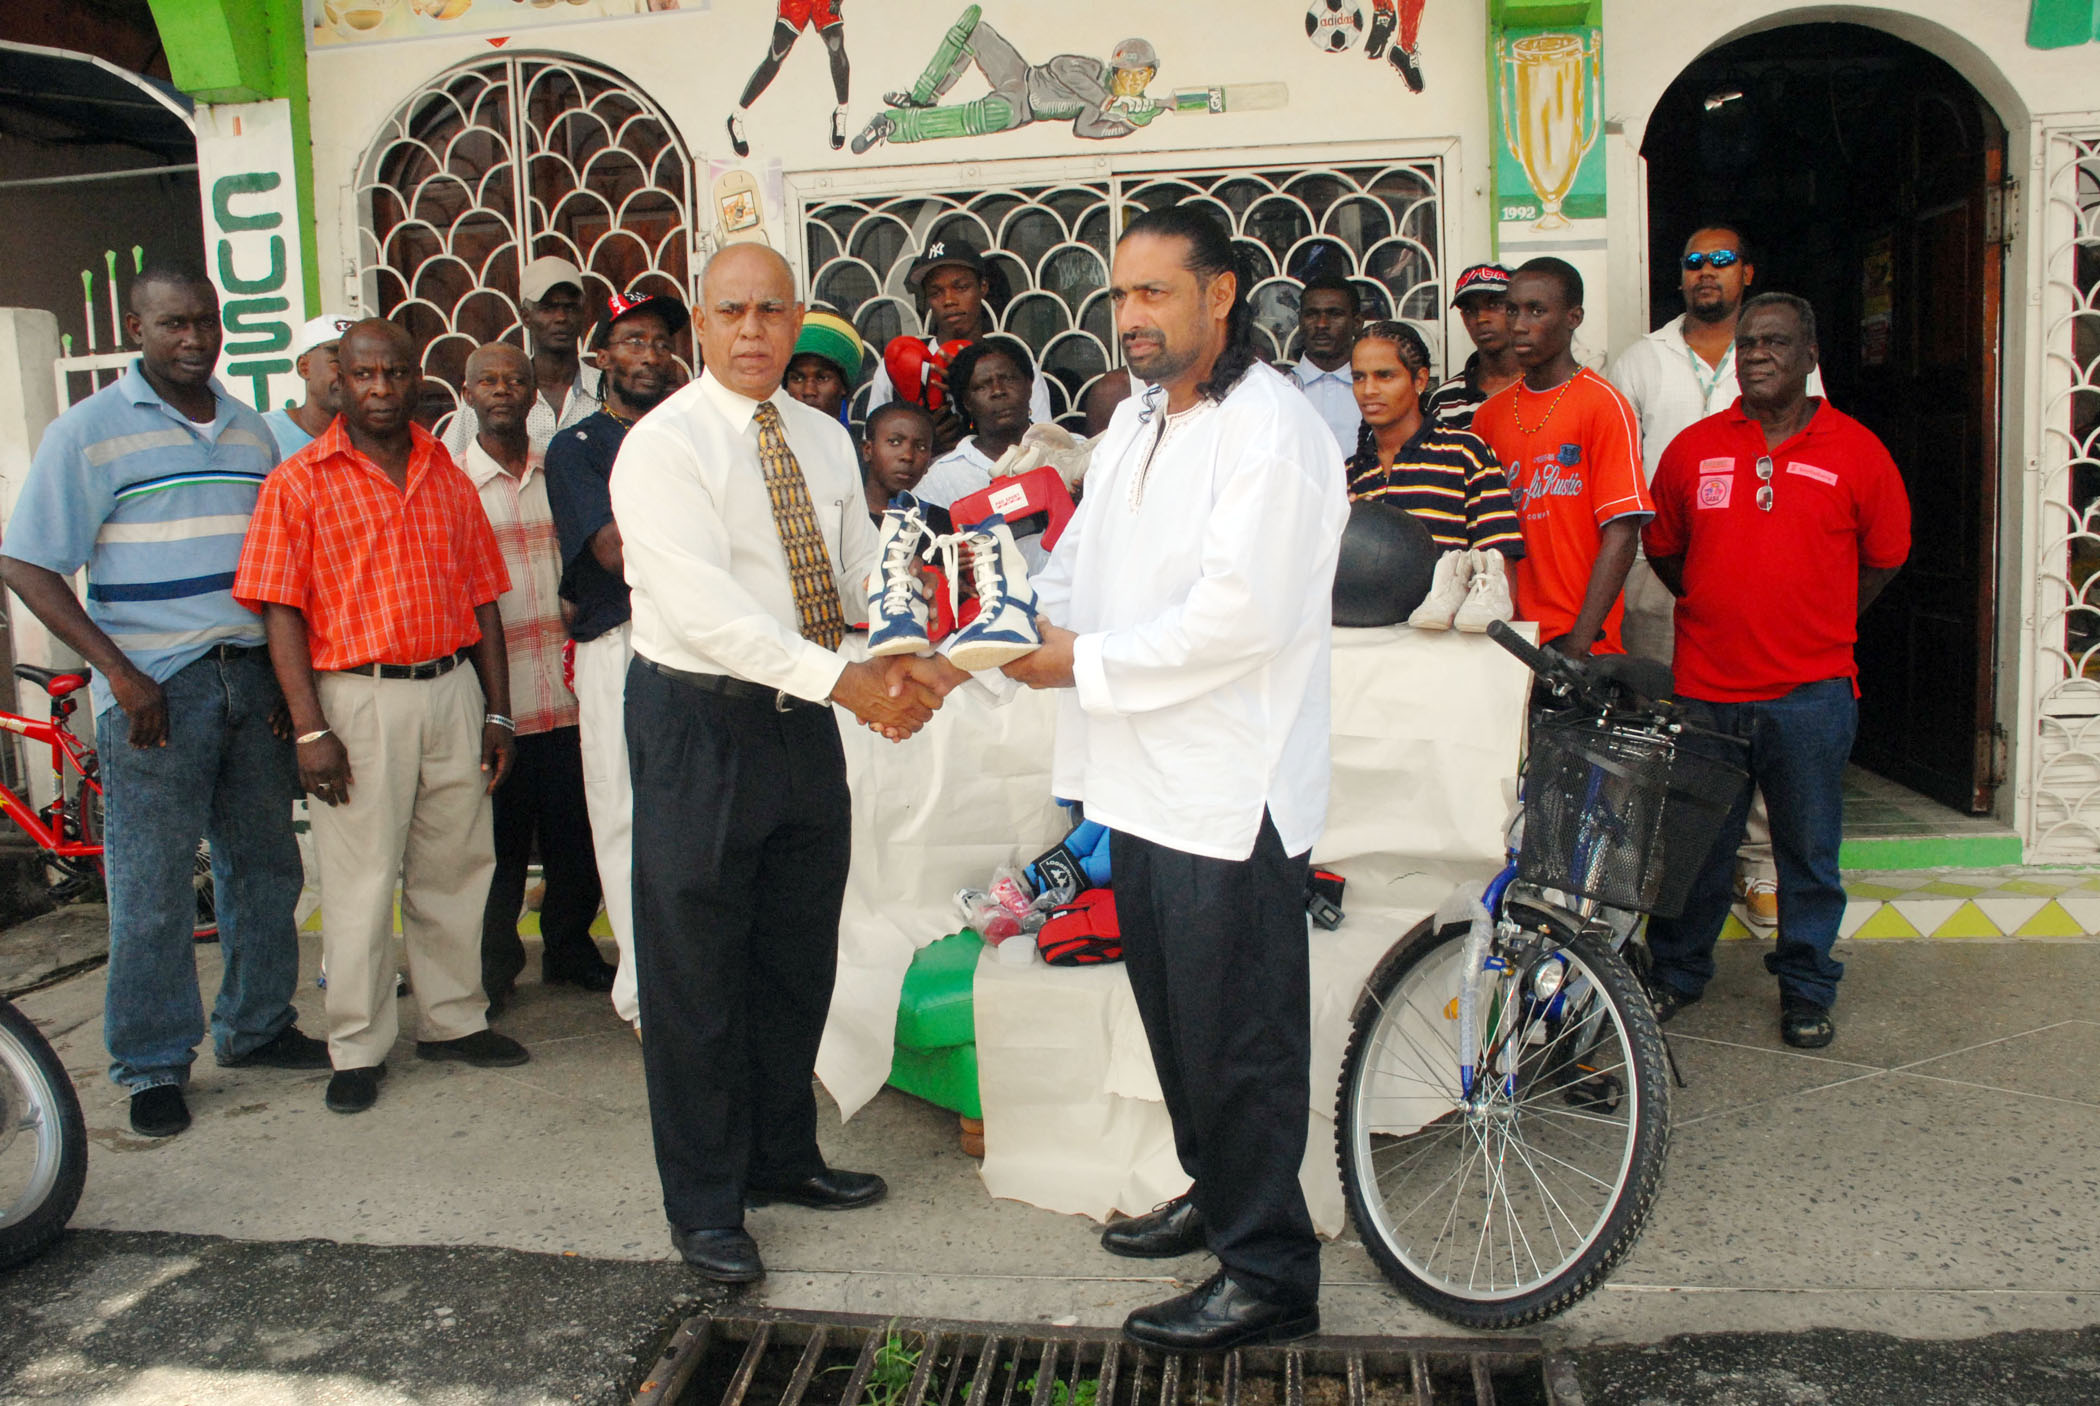 Managing Director of West Indian Sports Complex, Mohammed Feroze Khan, right, hands over a pair of boxing shoes to President of the Guyana Amateur Boxing Association (GABA) Affeeze Khan in the presence of members of the various boxing gyms. (Clairmonte Marcus photo)